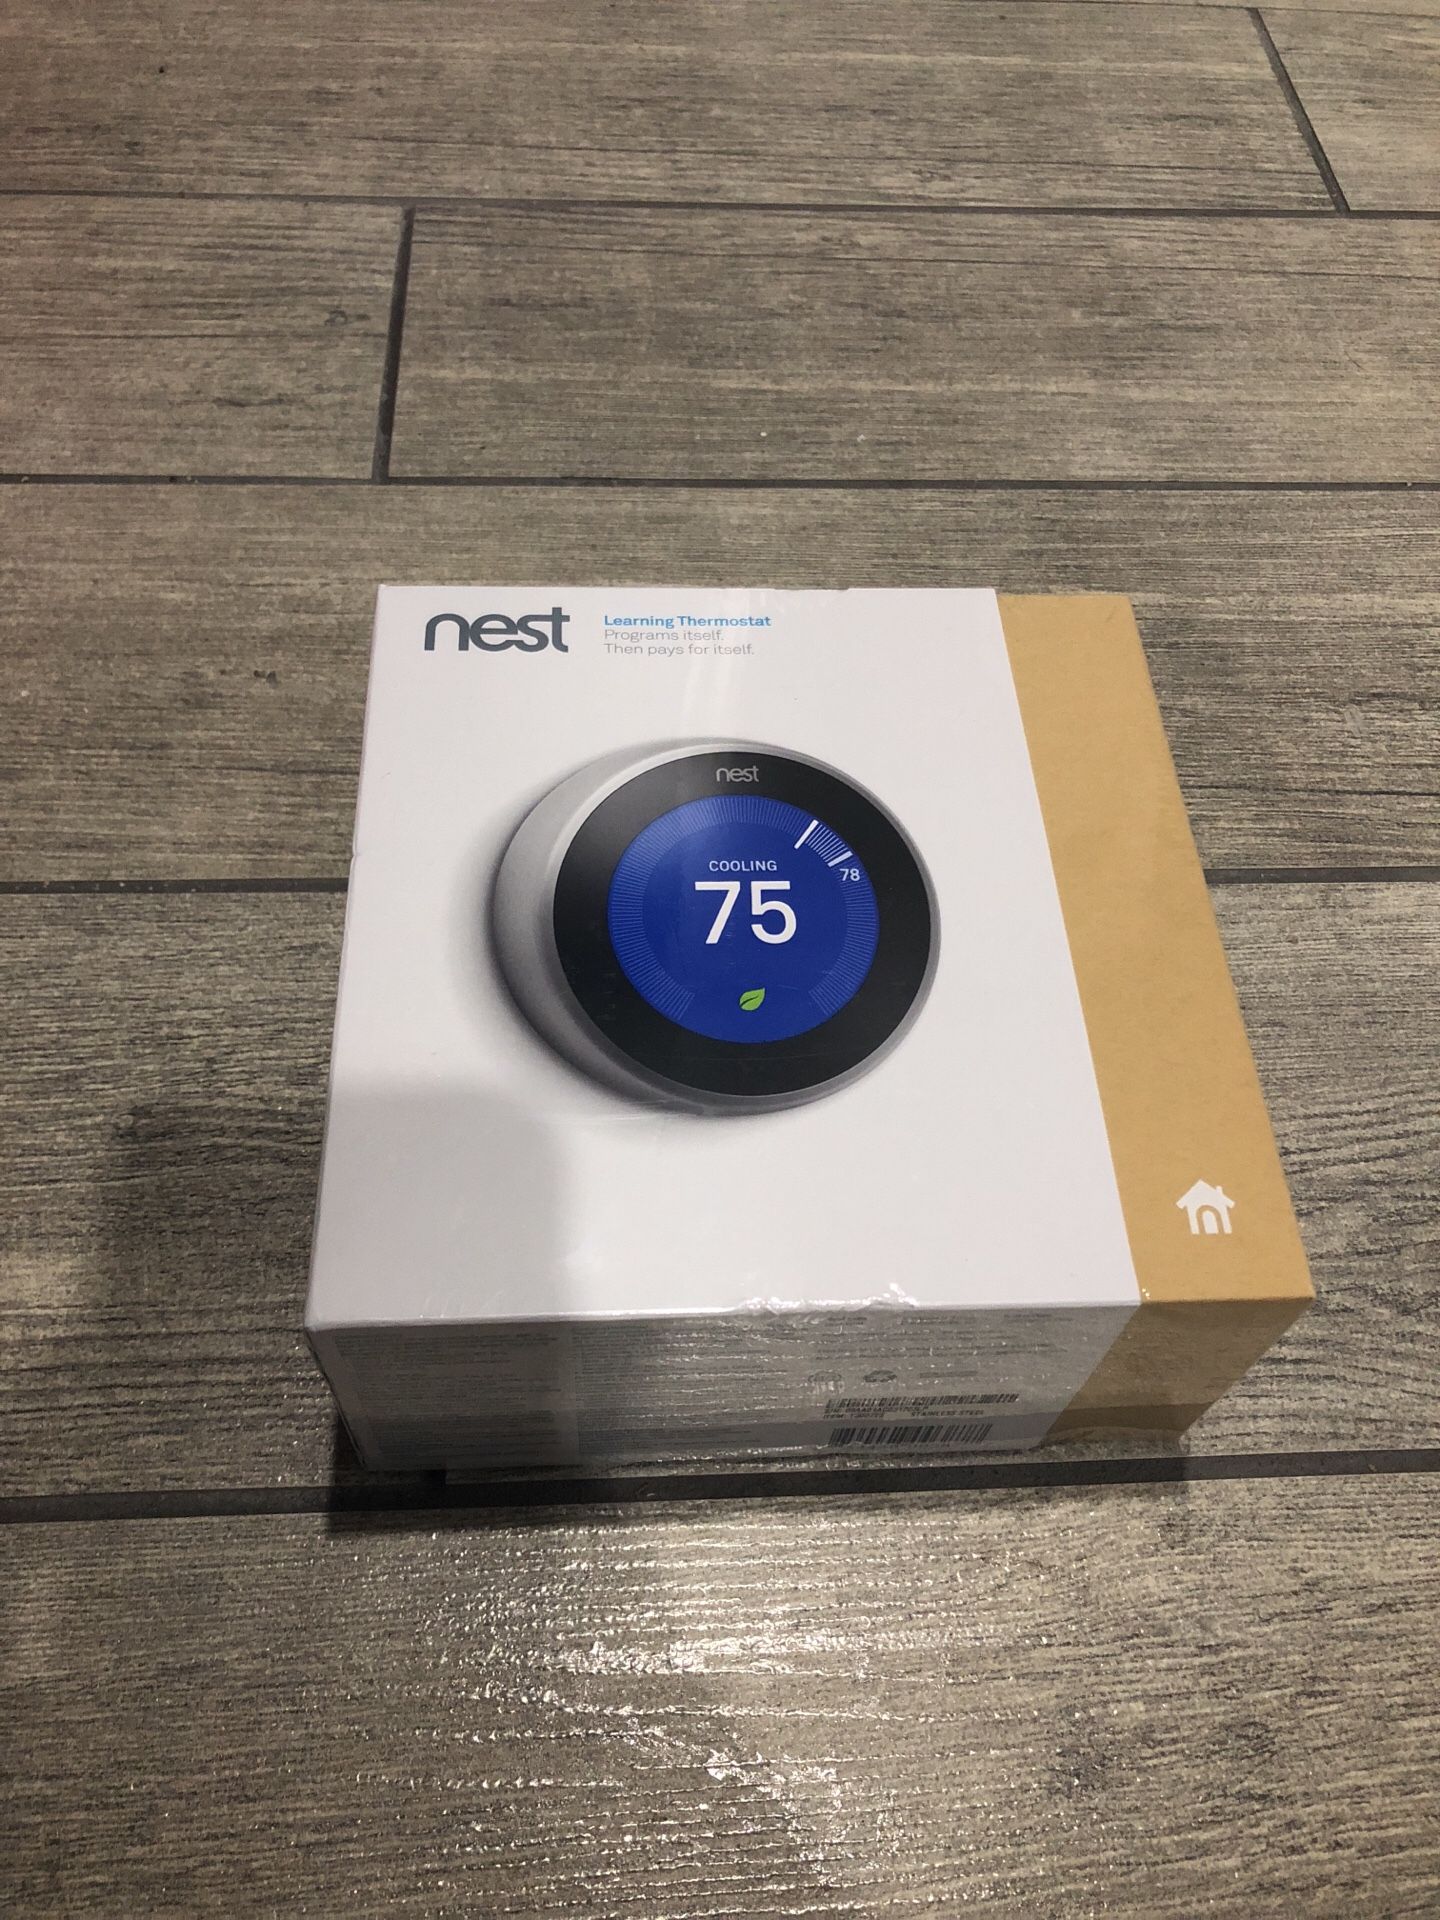 Nest Thermostat Brand new never opened